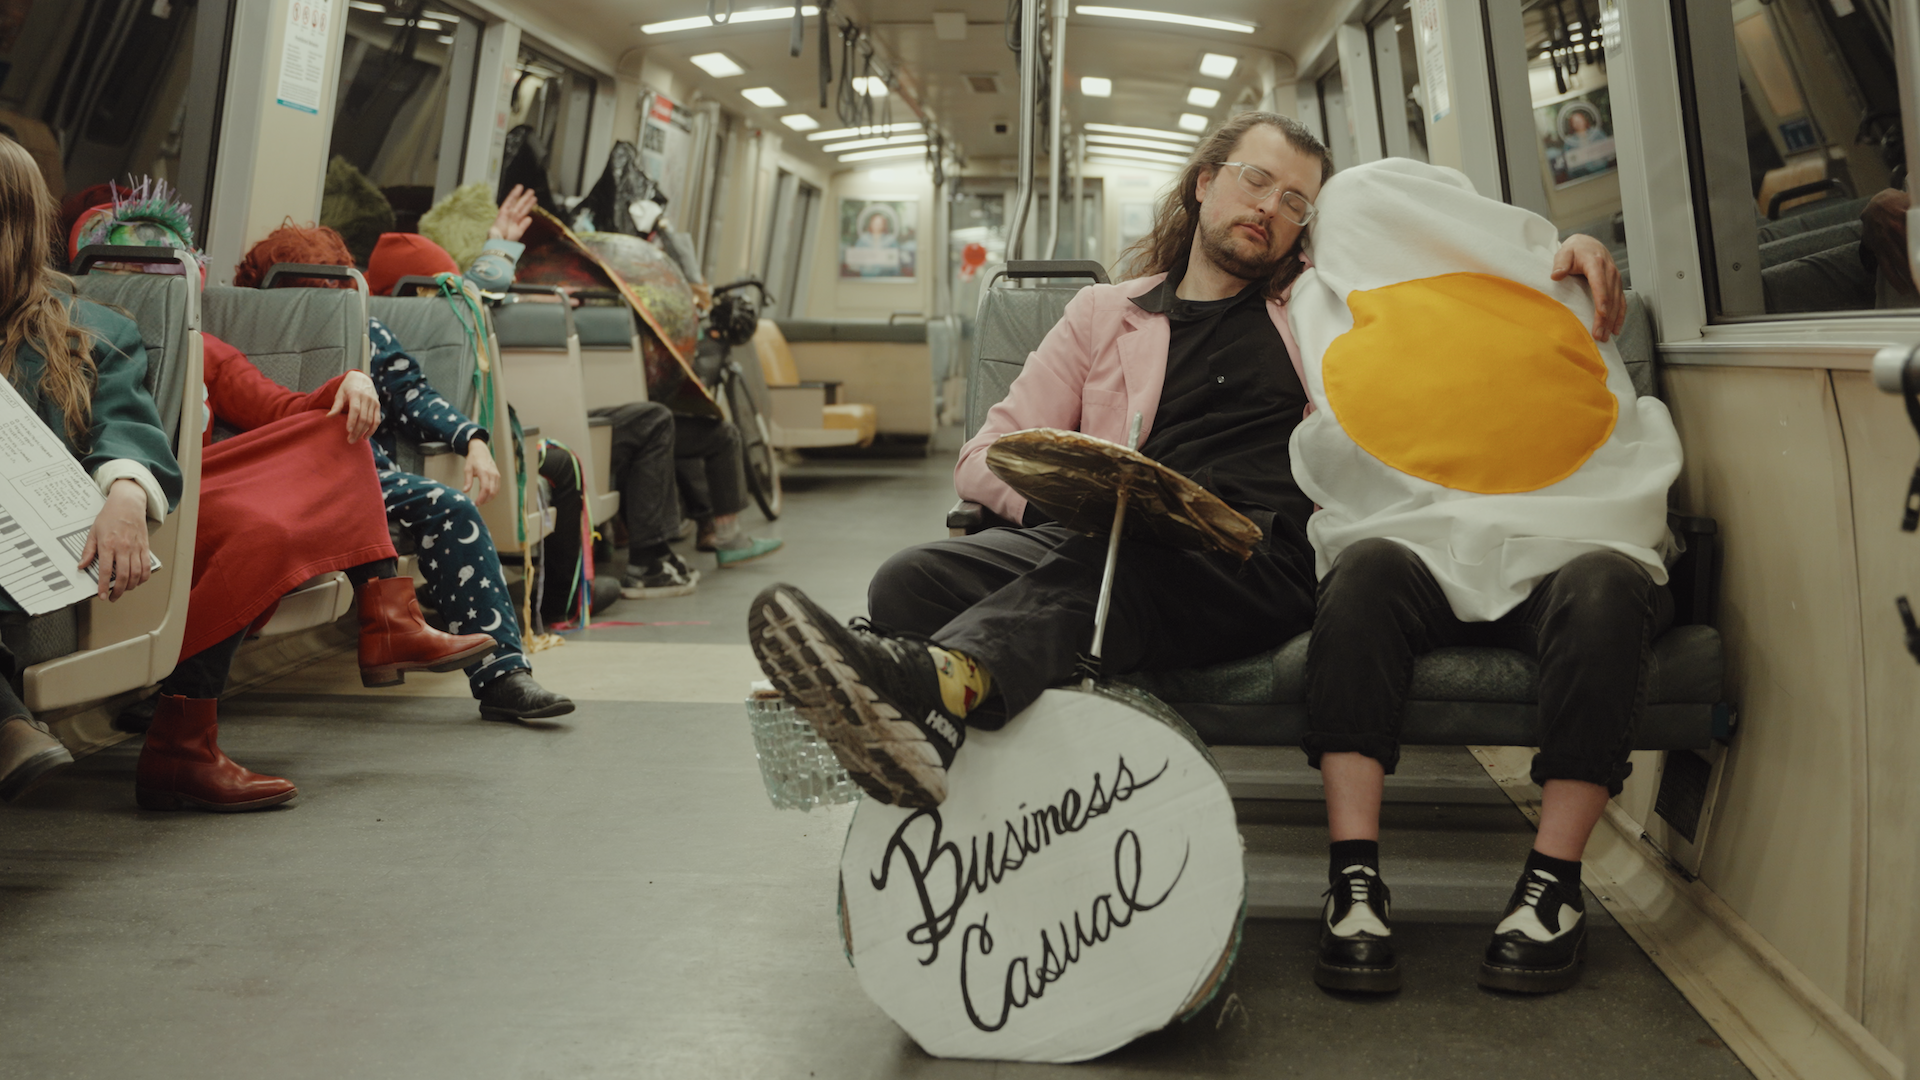 A man with long hair and glasses wearing a pink blazer over dark clothing rests his legs on a toy drum kit and drapes his left arm over a person wearing a fried egg costume. Both sit asleep on a subway train seat.